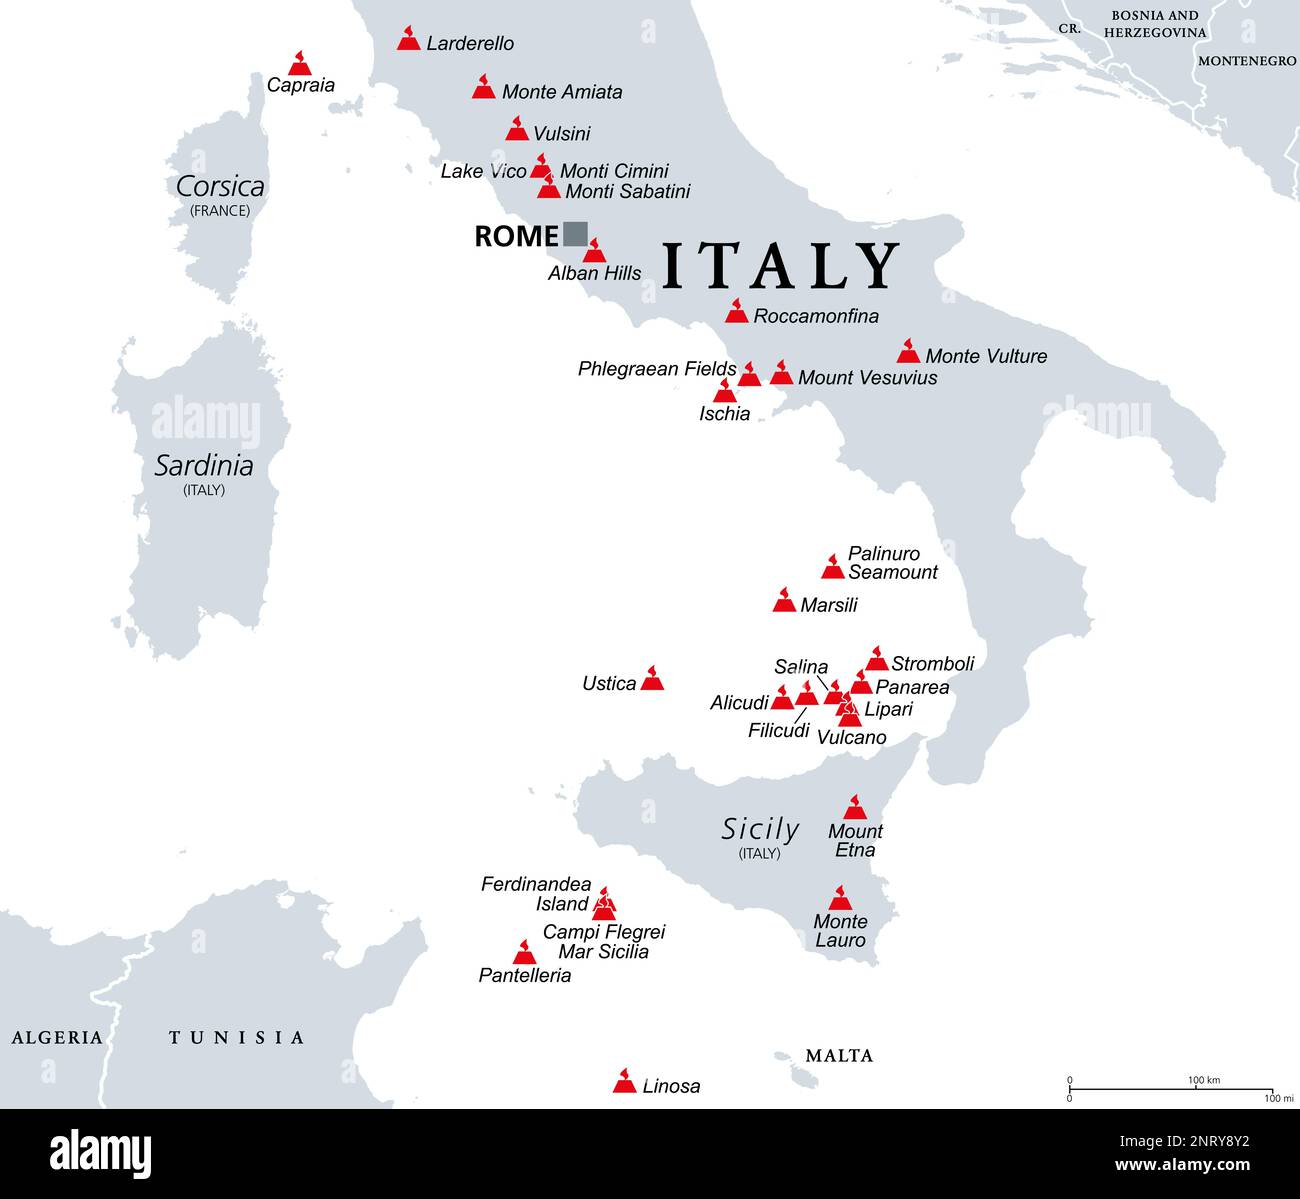 Italy, active and extinct volcanoes, political map. Active, dormant and underwater volcanoes in Italy, a volcanically very active country. Stock Photo